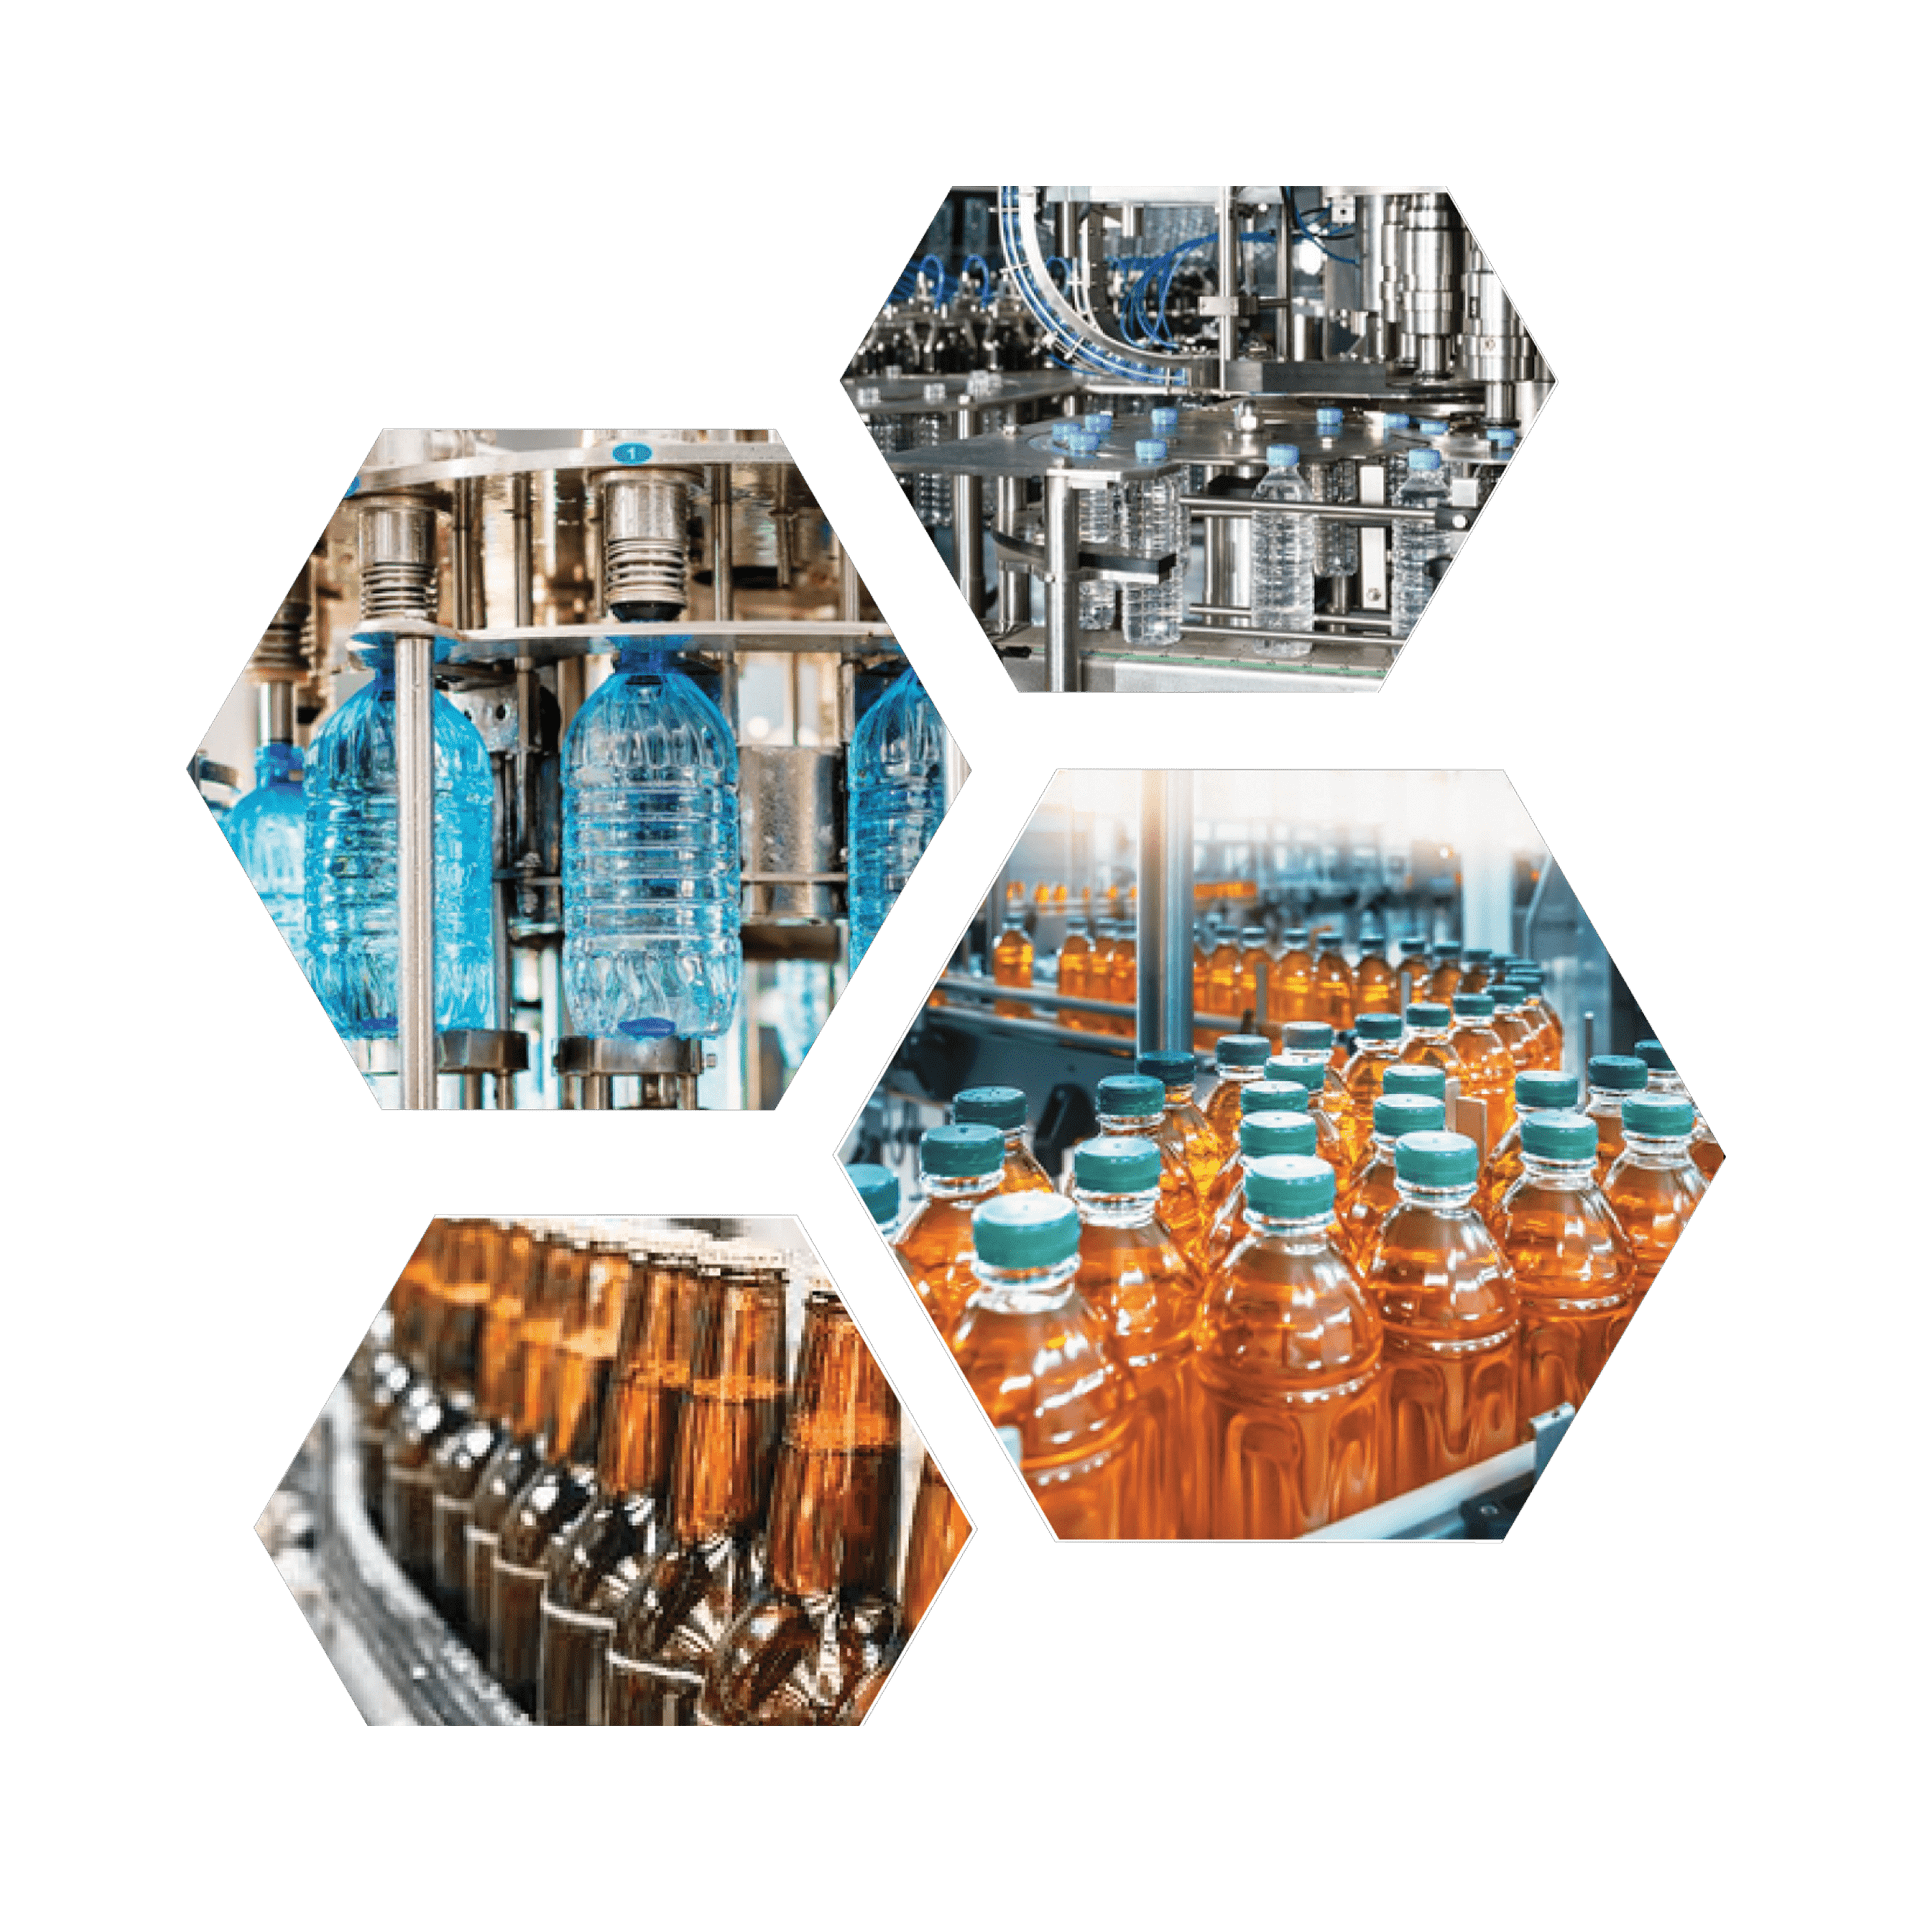 Machinery for Beverage Manufacturing